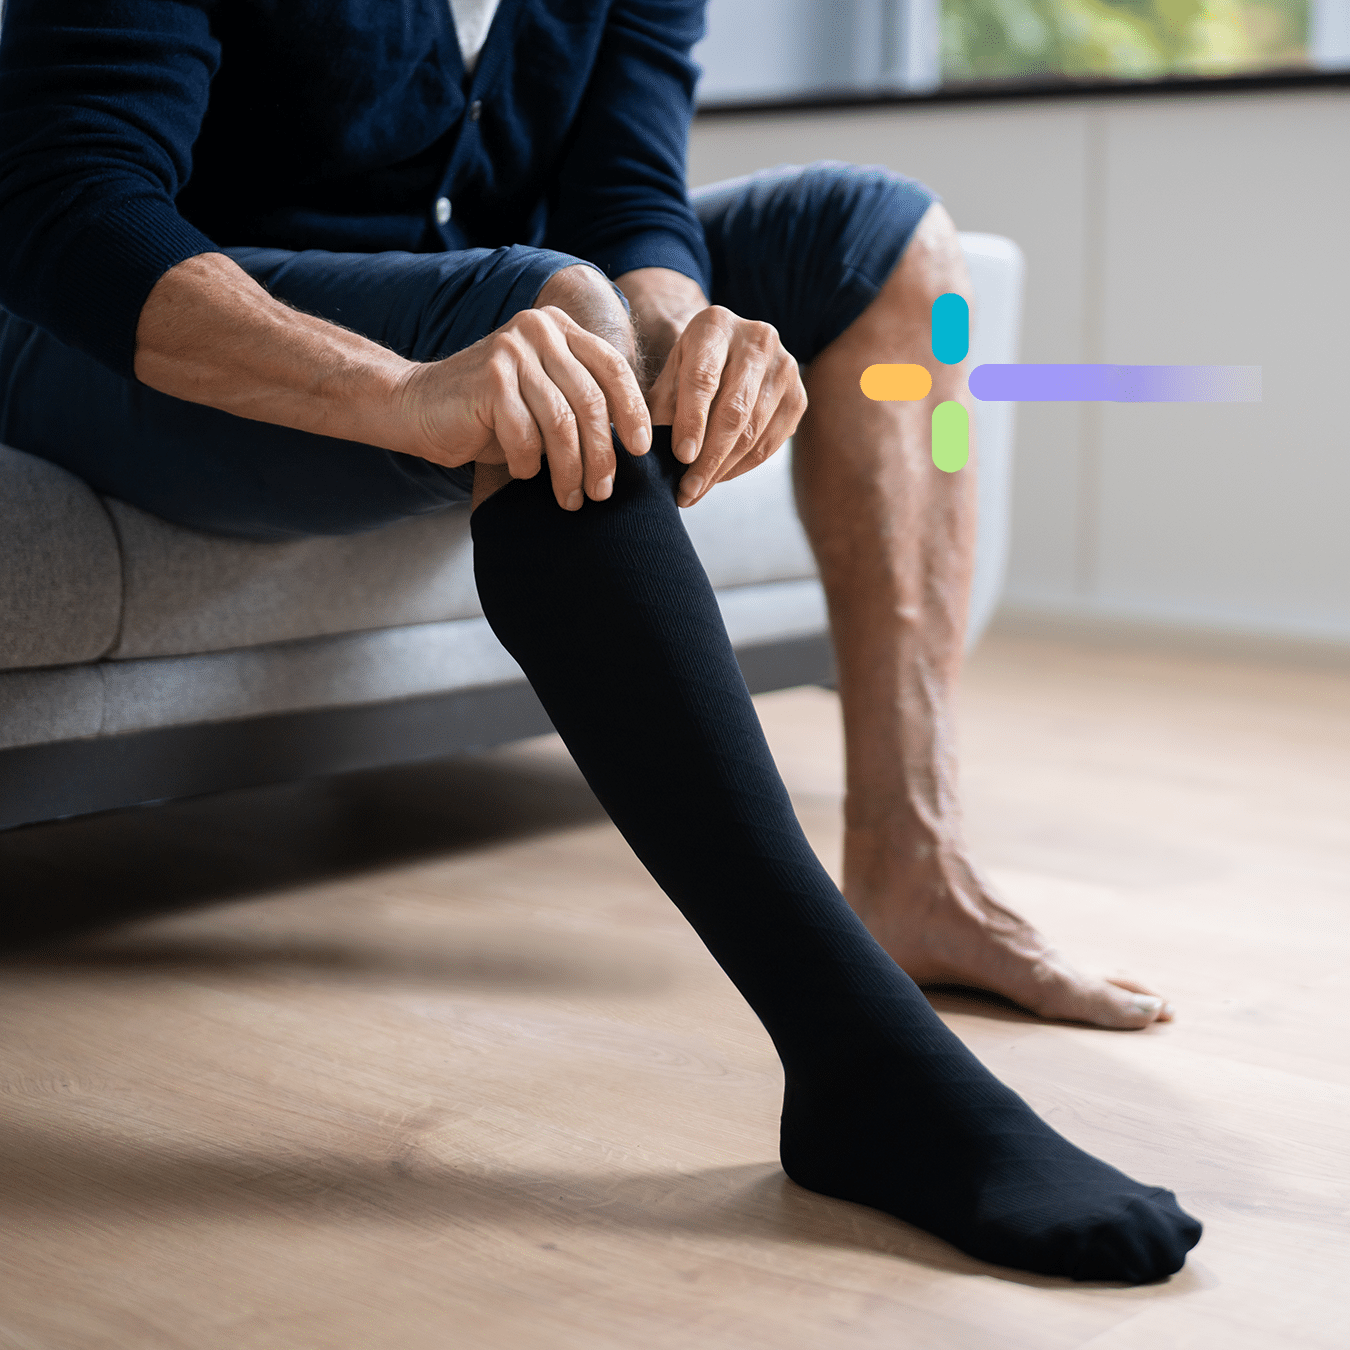 Wearing compression socks on long flights helps with DVT